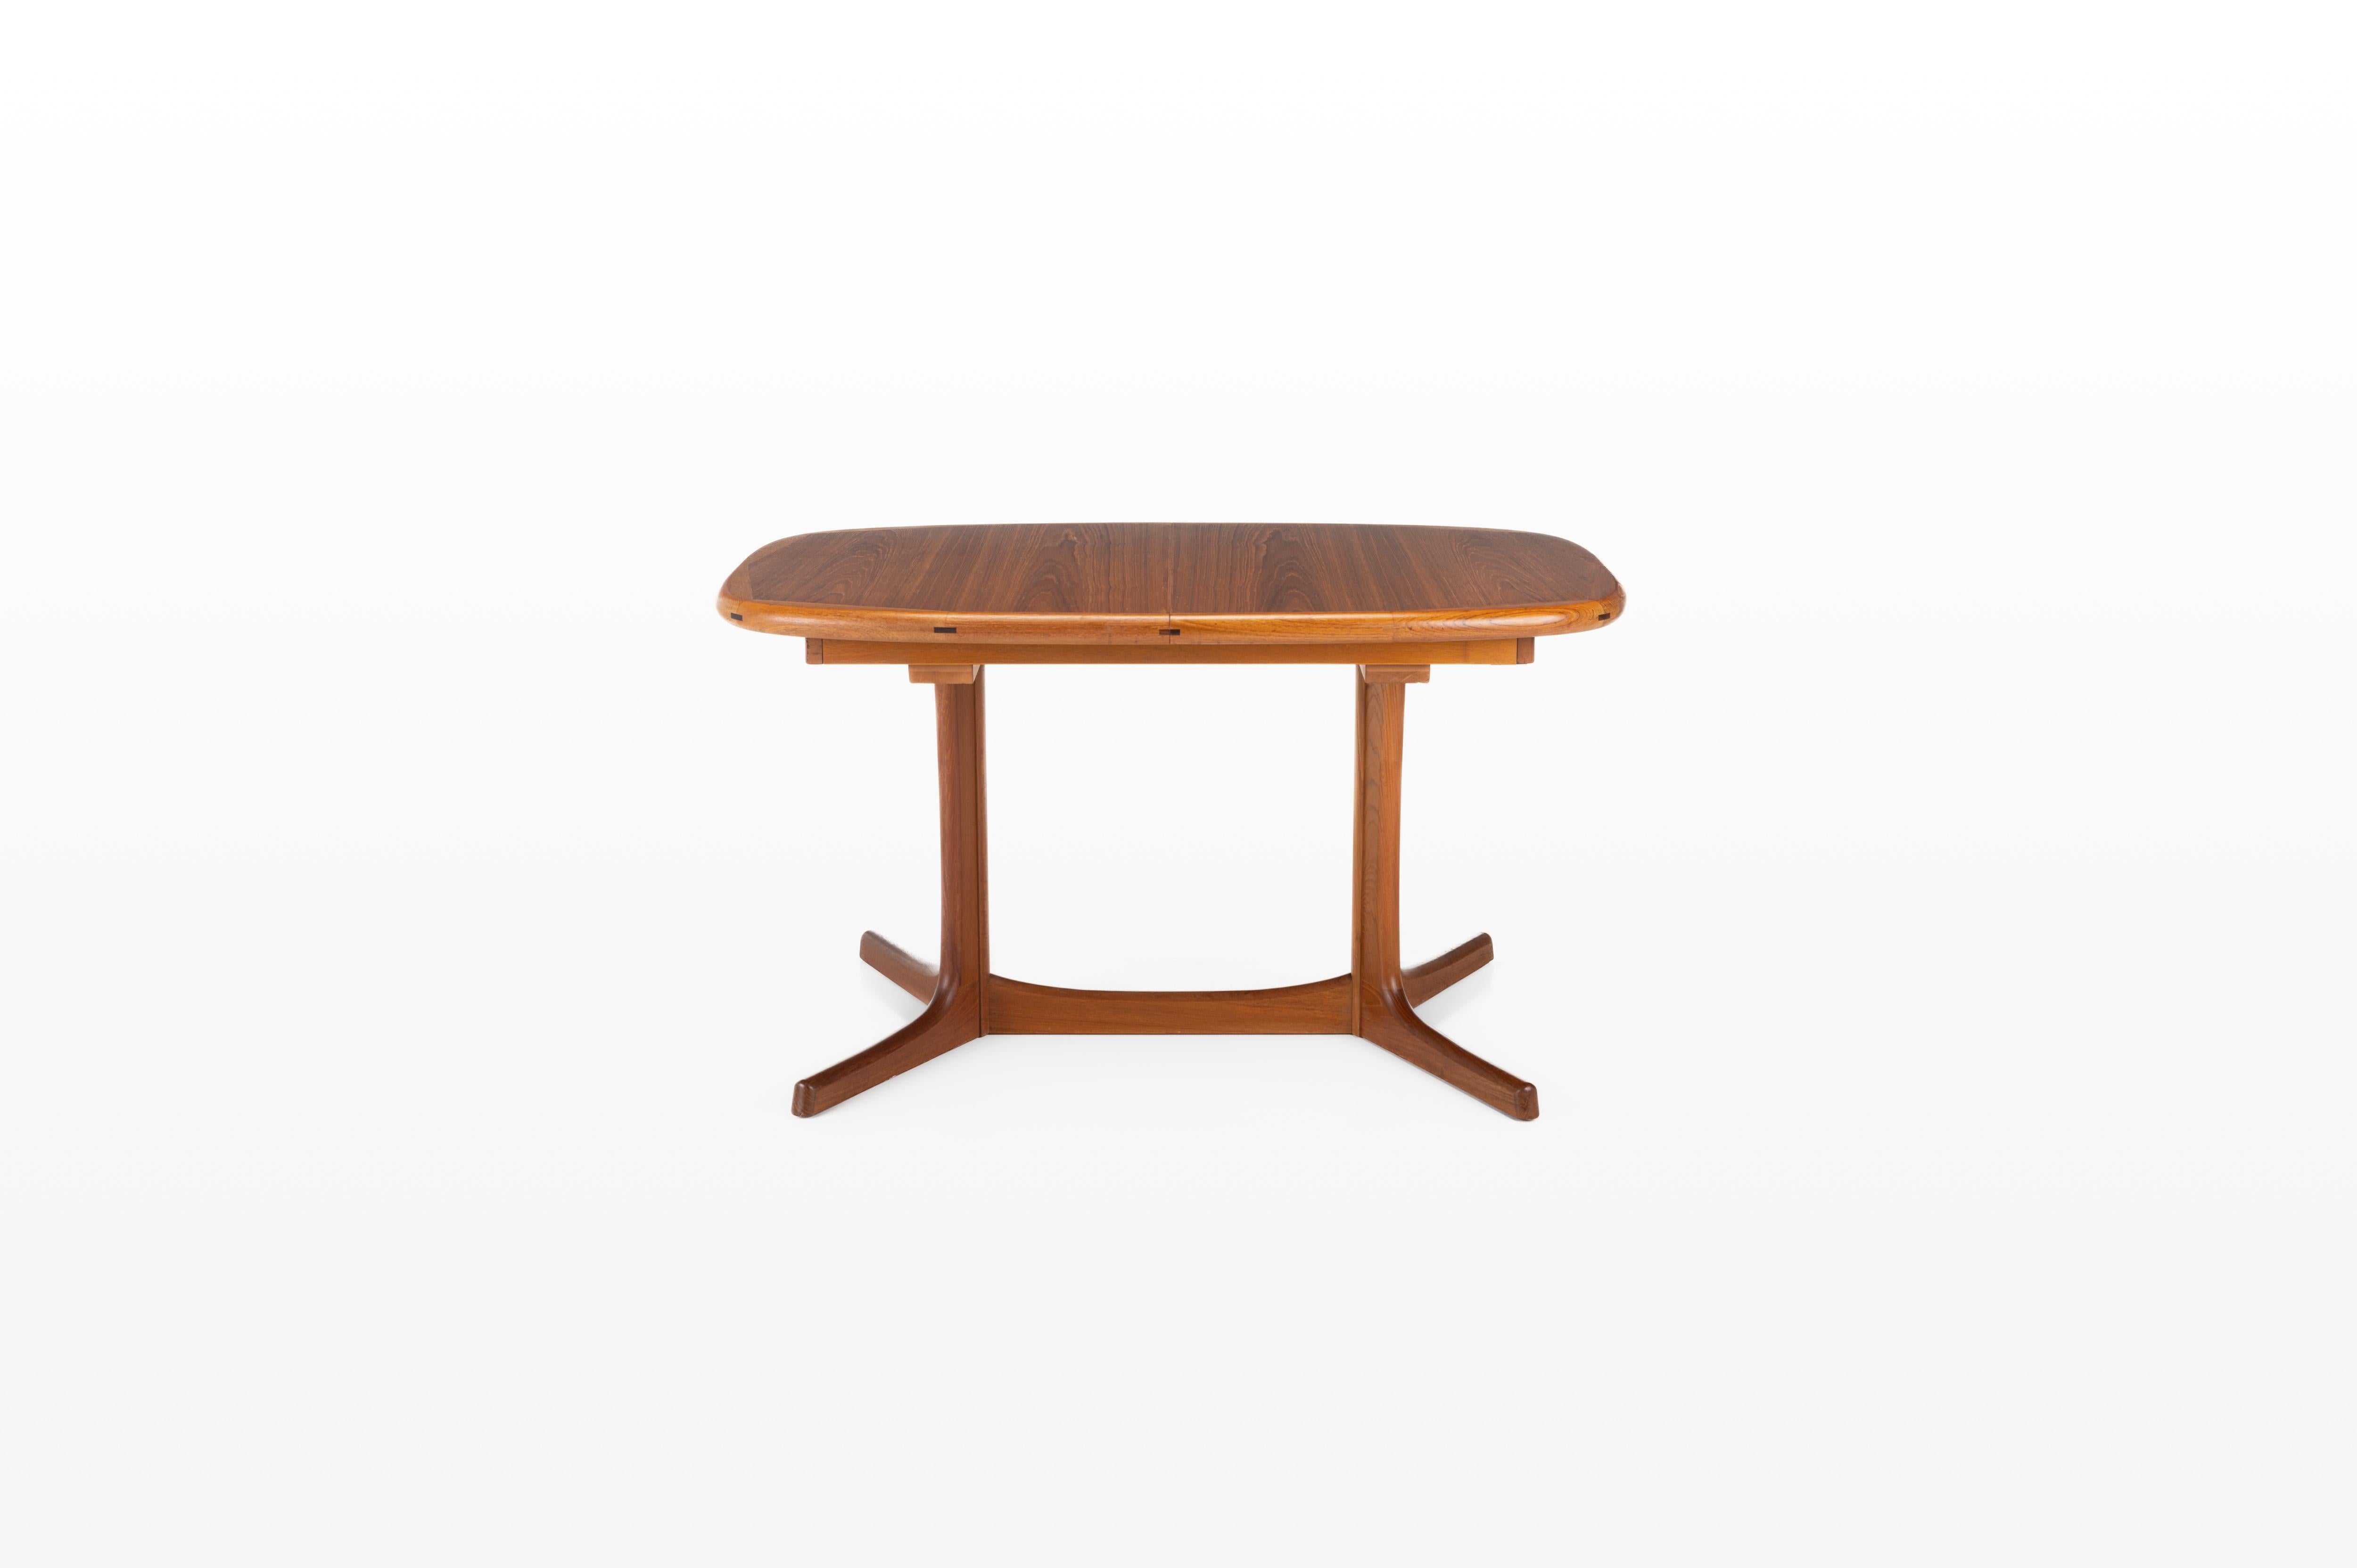 Beautiful extendable dining table produced by Dyrlund, Denmark. The table is made of teak wood and is in very good restored condition. Marked by the producer.